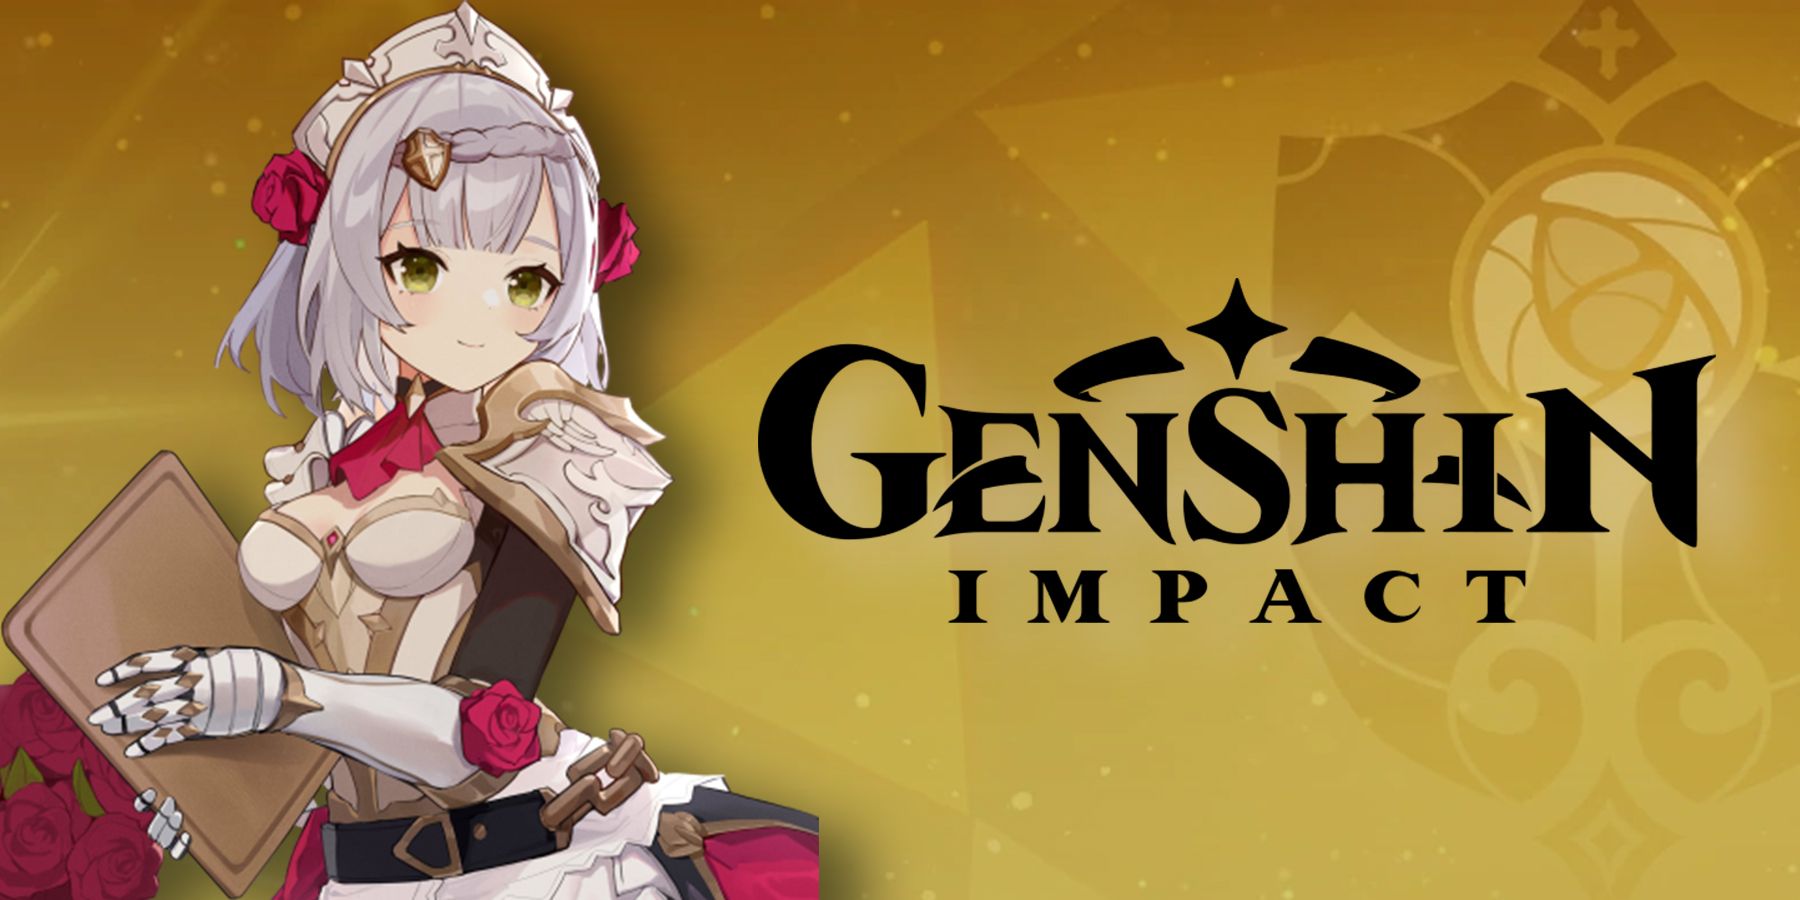 Genshin Impact: Yelan's materials, ascension resources, and talent